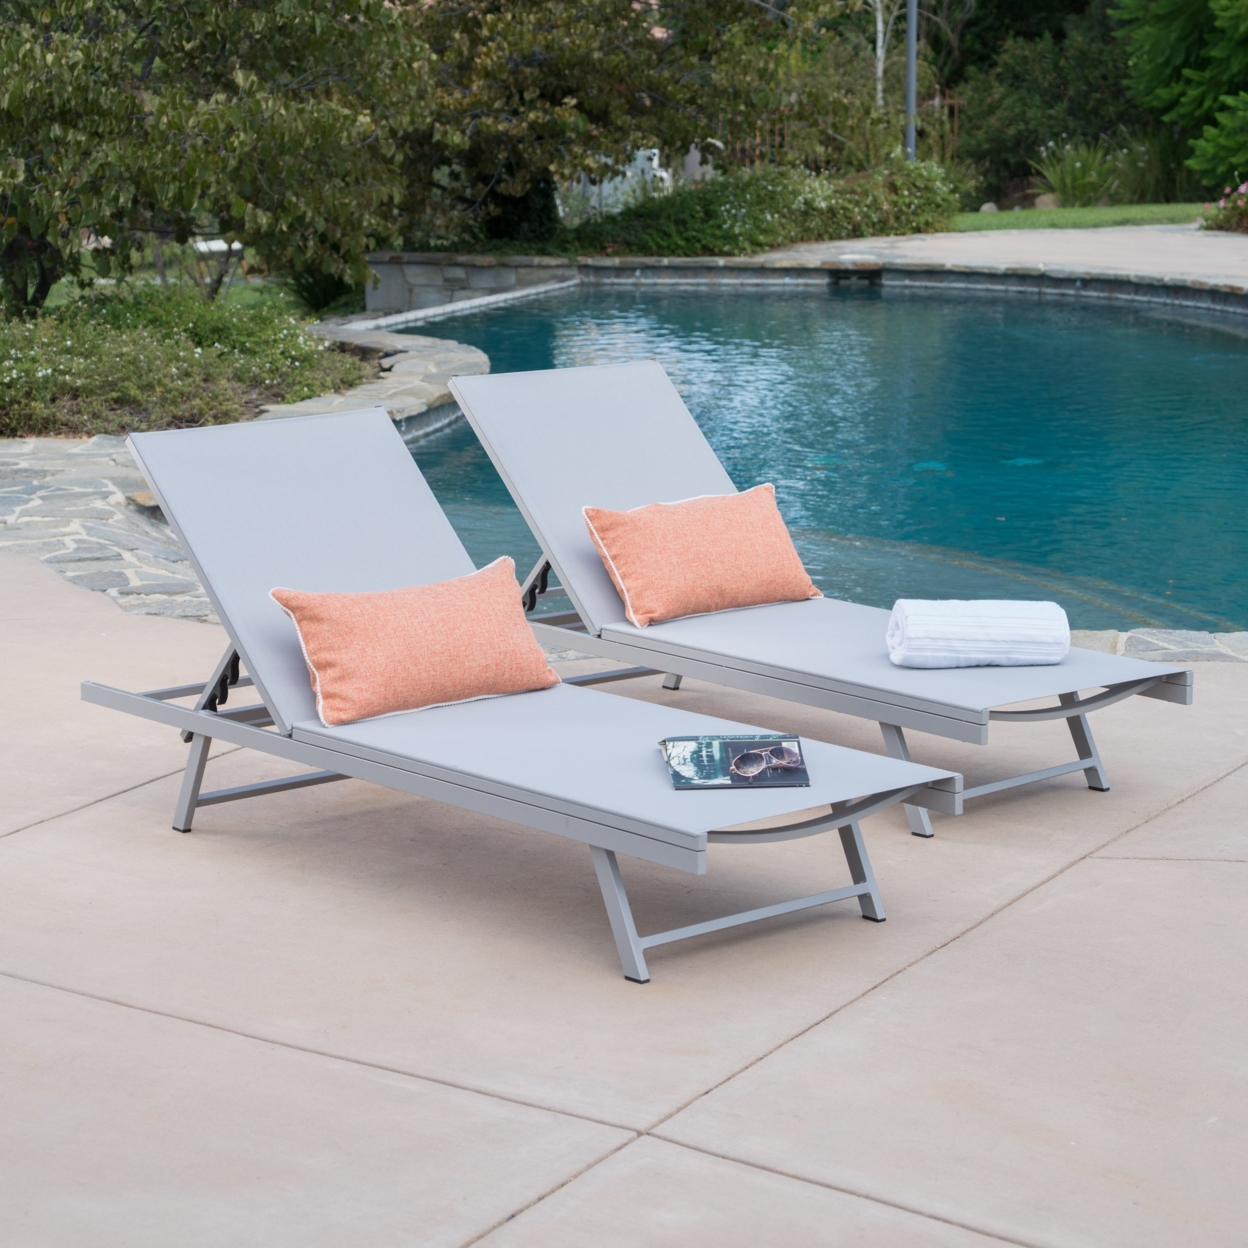 Allen Outdoor Gray Mesh Chaise Lounge With Aluminum Frame - Gray, Set Of 4